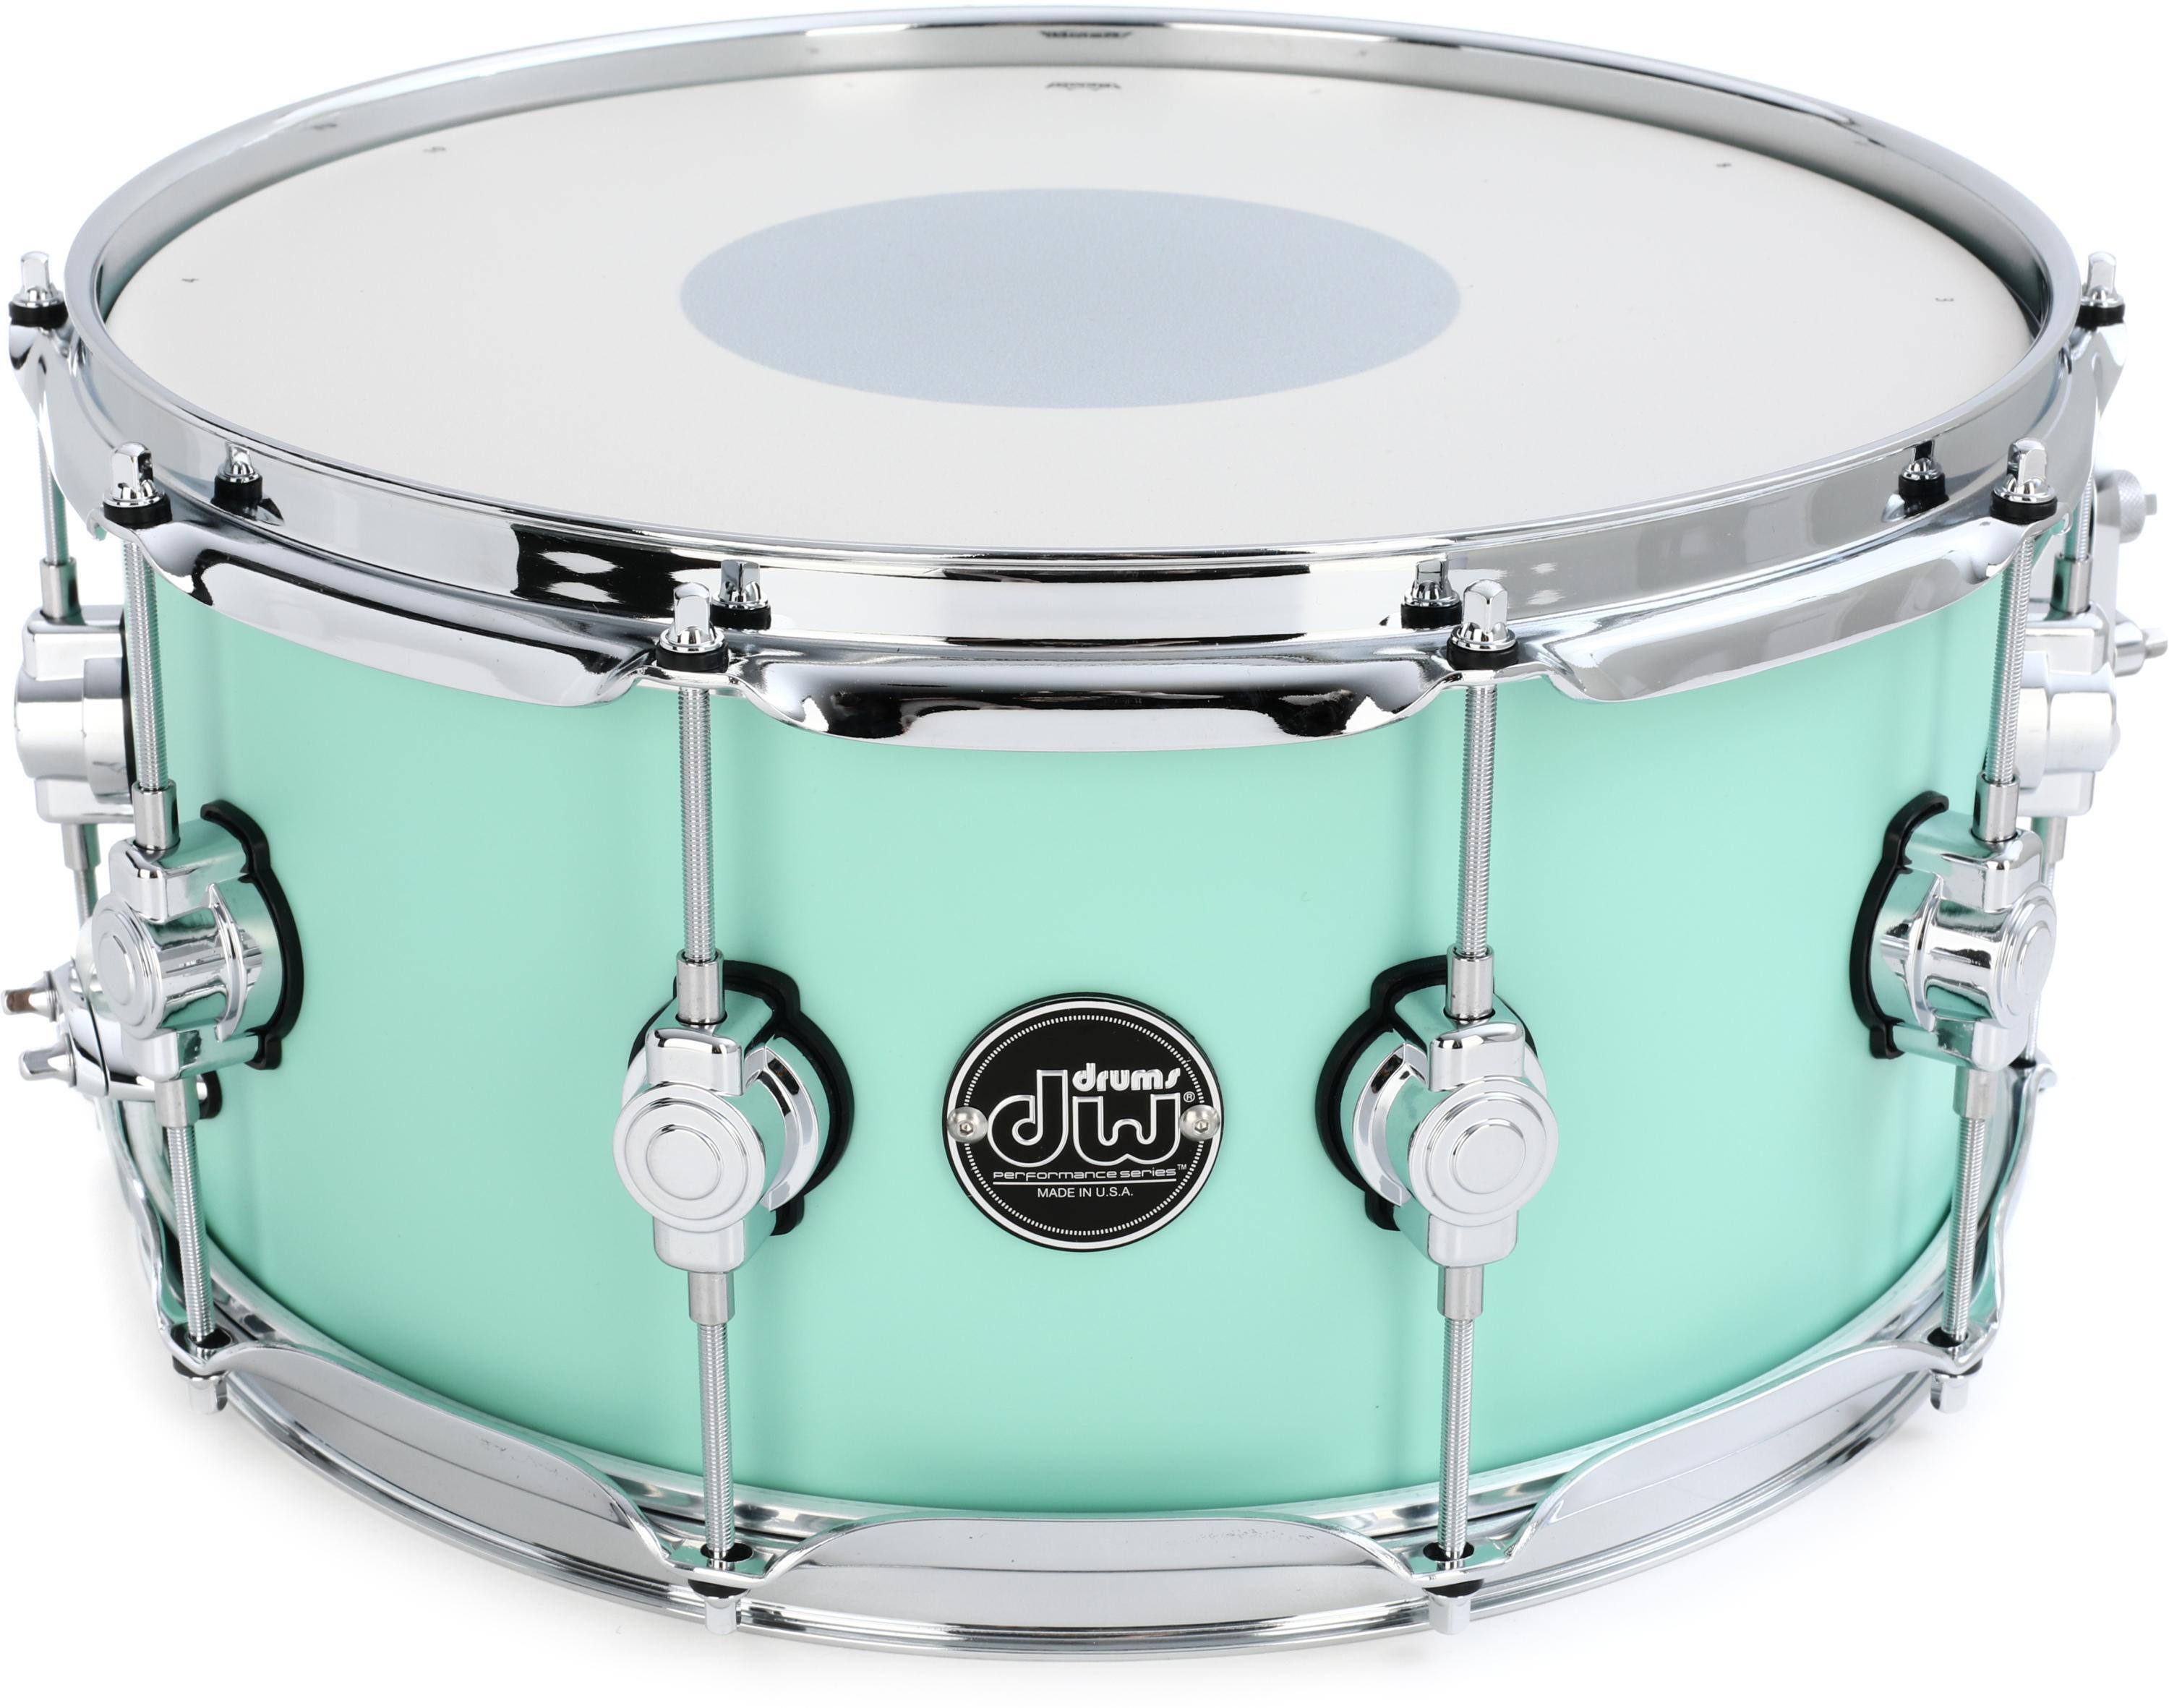 DW Performance Series Snare Drum - 6.5 x 14 inch - Satin Sea Foam -  Sweetwater Exclusive